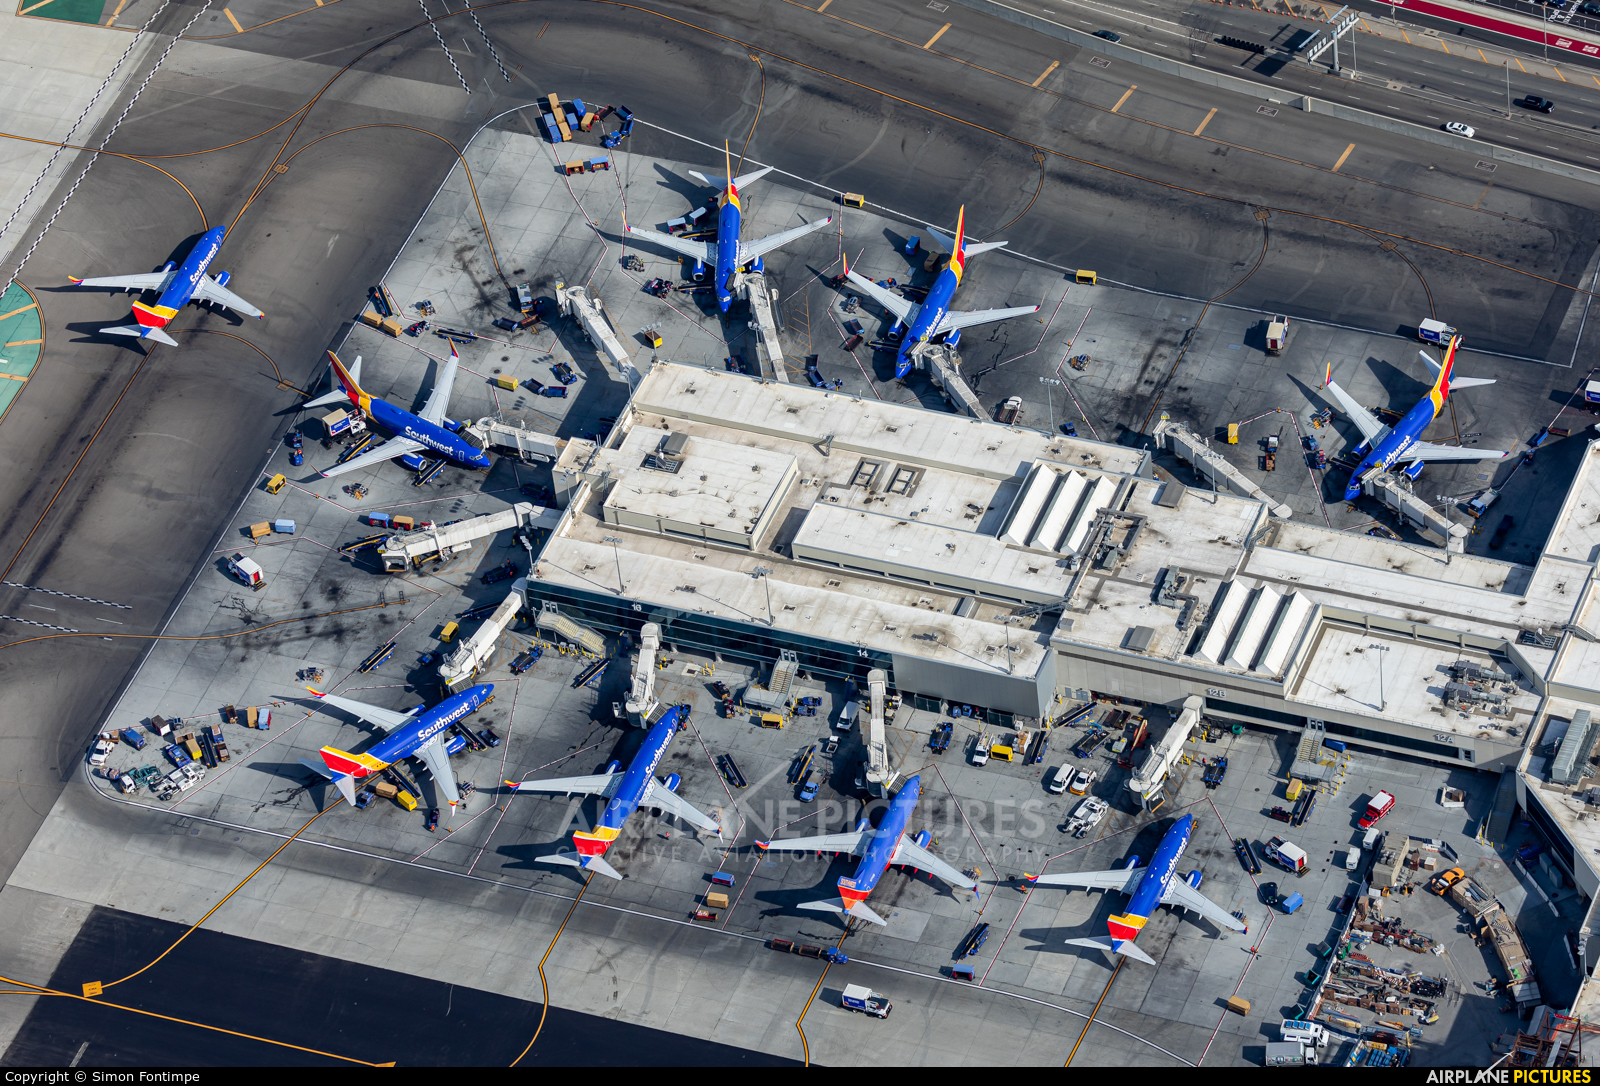 southwest airlines airport map